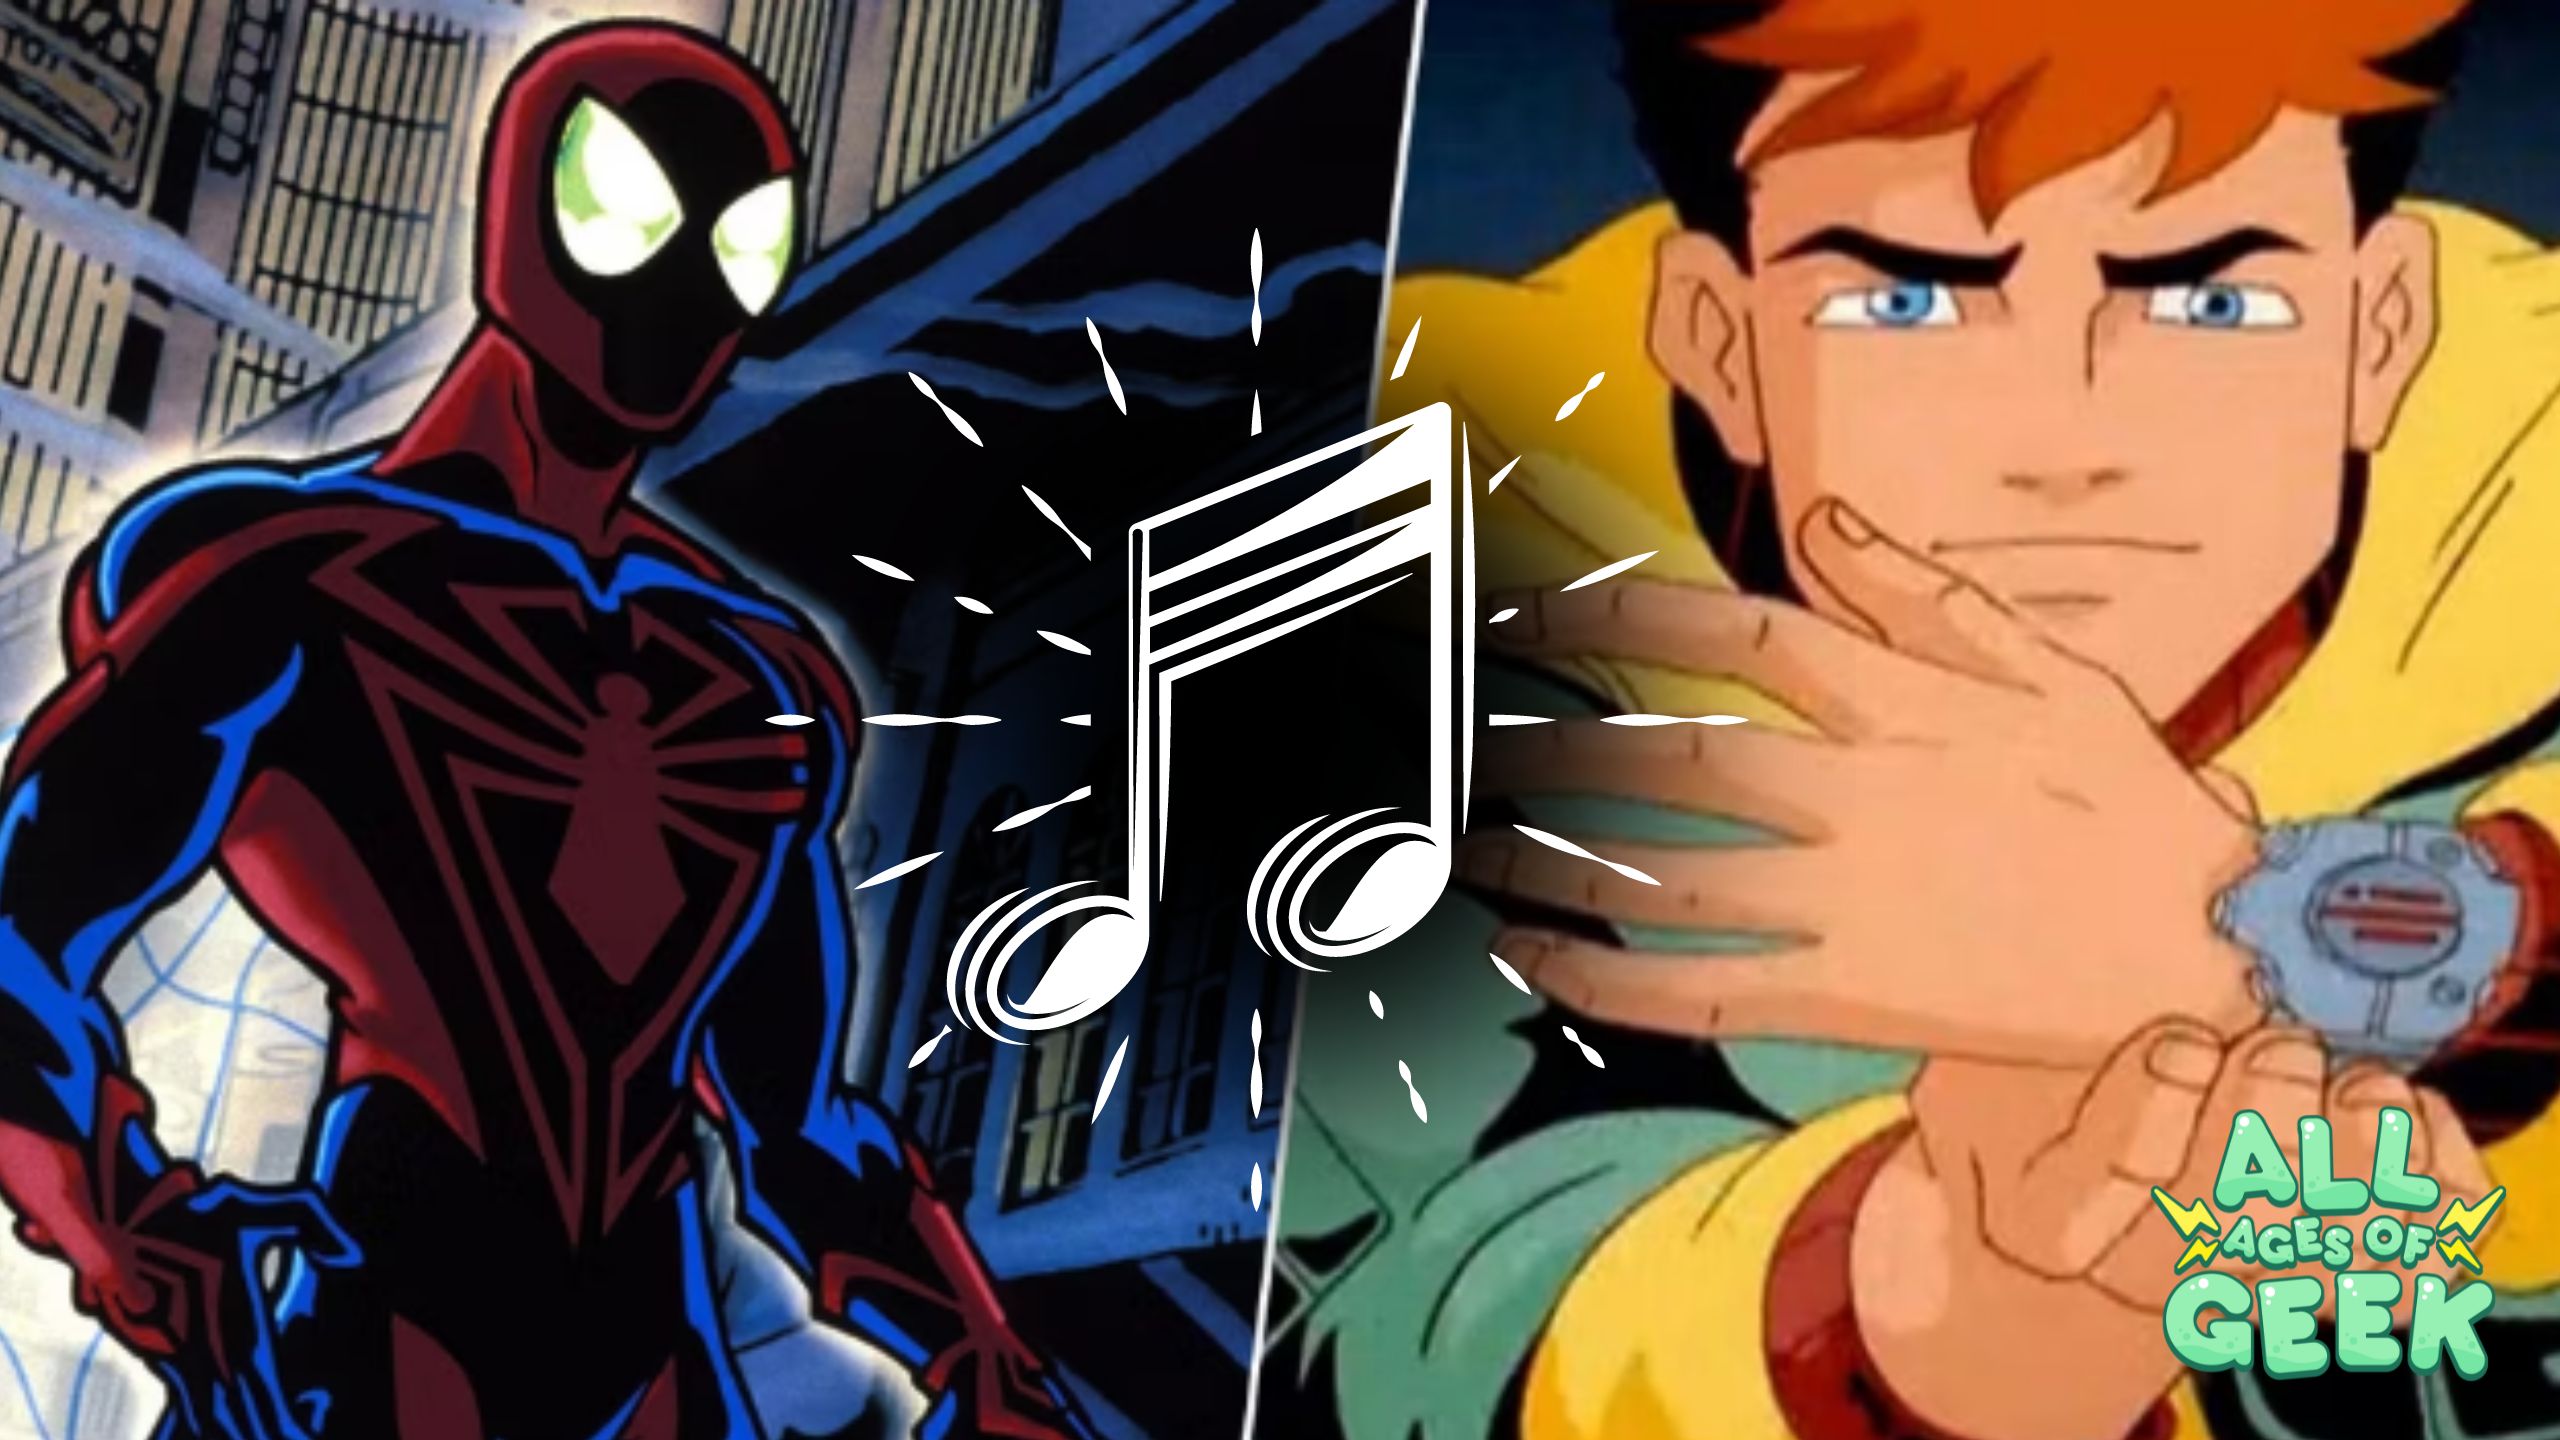 A split image featuring Spider-Man in his "Spider-Man Unlimited" suit on the left and a close-up of Peter Parker with his wrist morph device on the right. In the center, a music note symbol is highlighted, indicating the musical theme. The All Ages of Geek logo is in the bottom right corner.